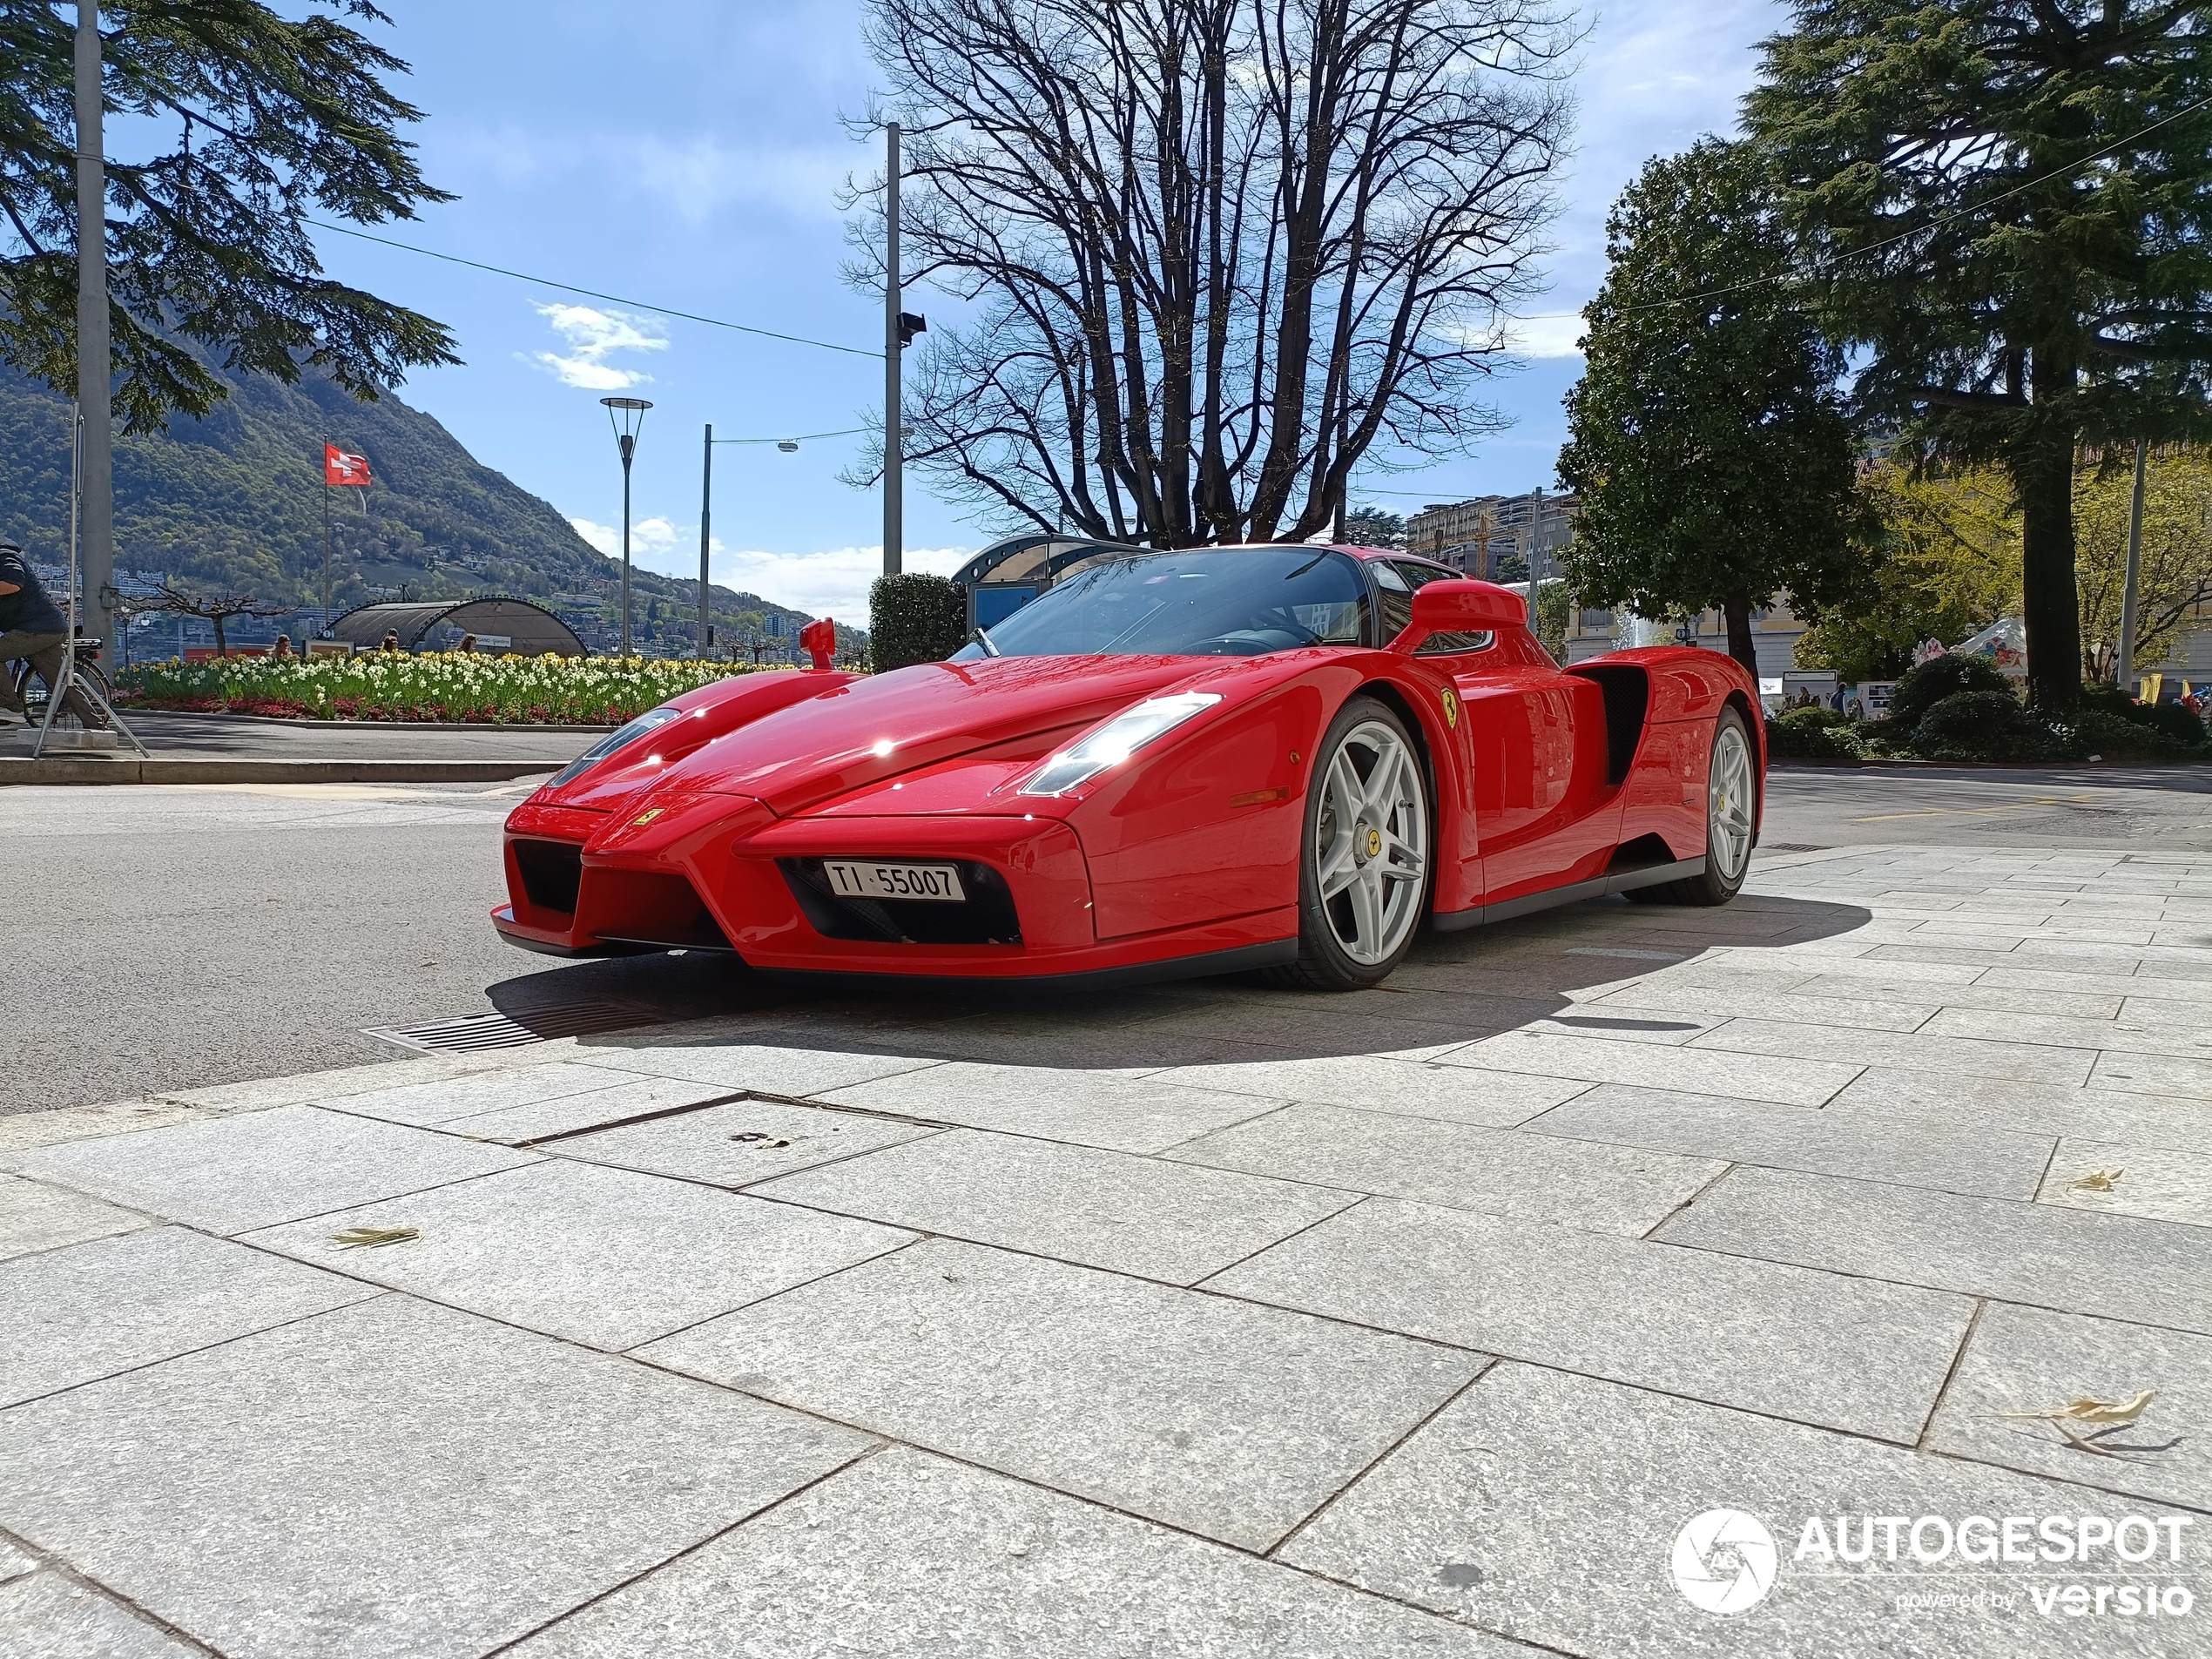 An Enzo Ferrari was parked in Lugano